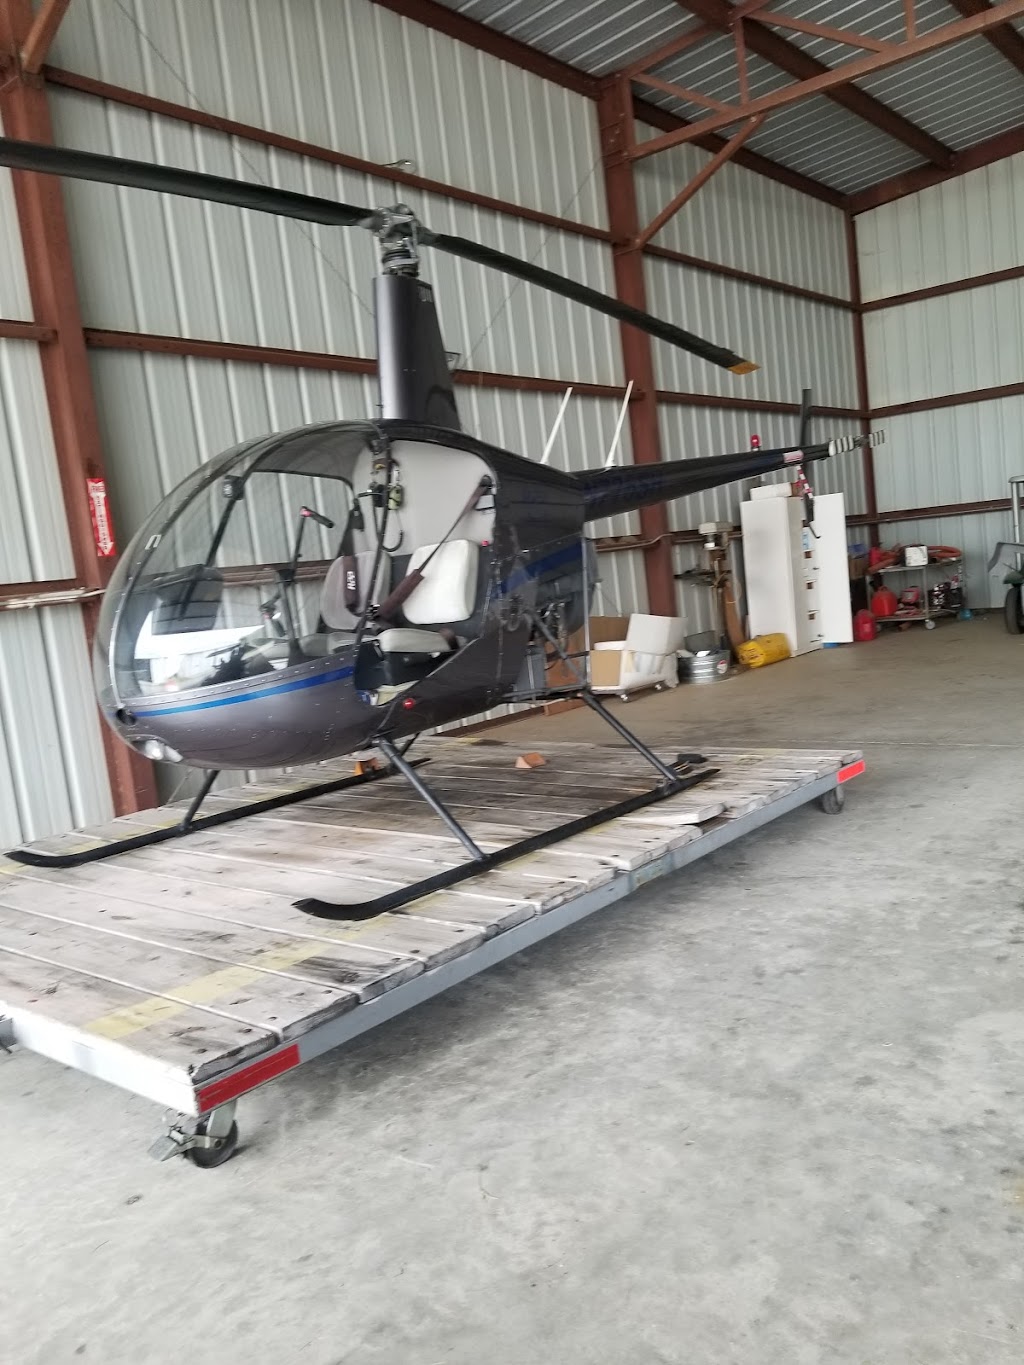 Blue Ridge Helicopter Inc | 850 Airport Rd, Lawrenceville, GA 30045 | Phone: (770) 963-0590